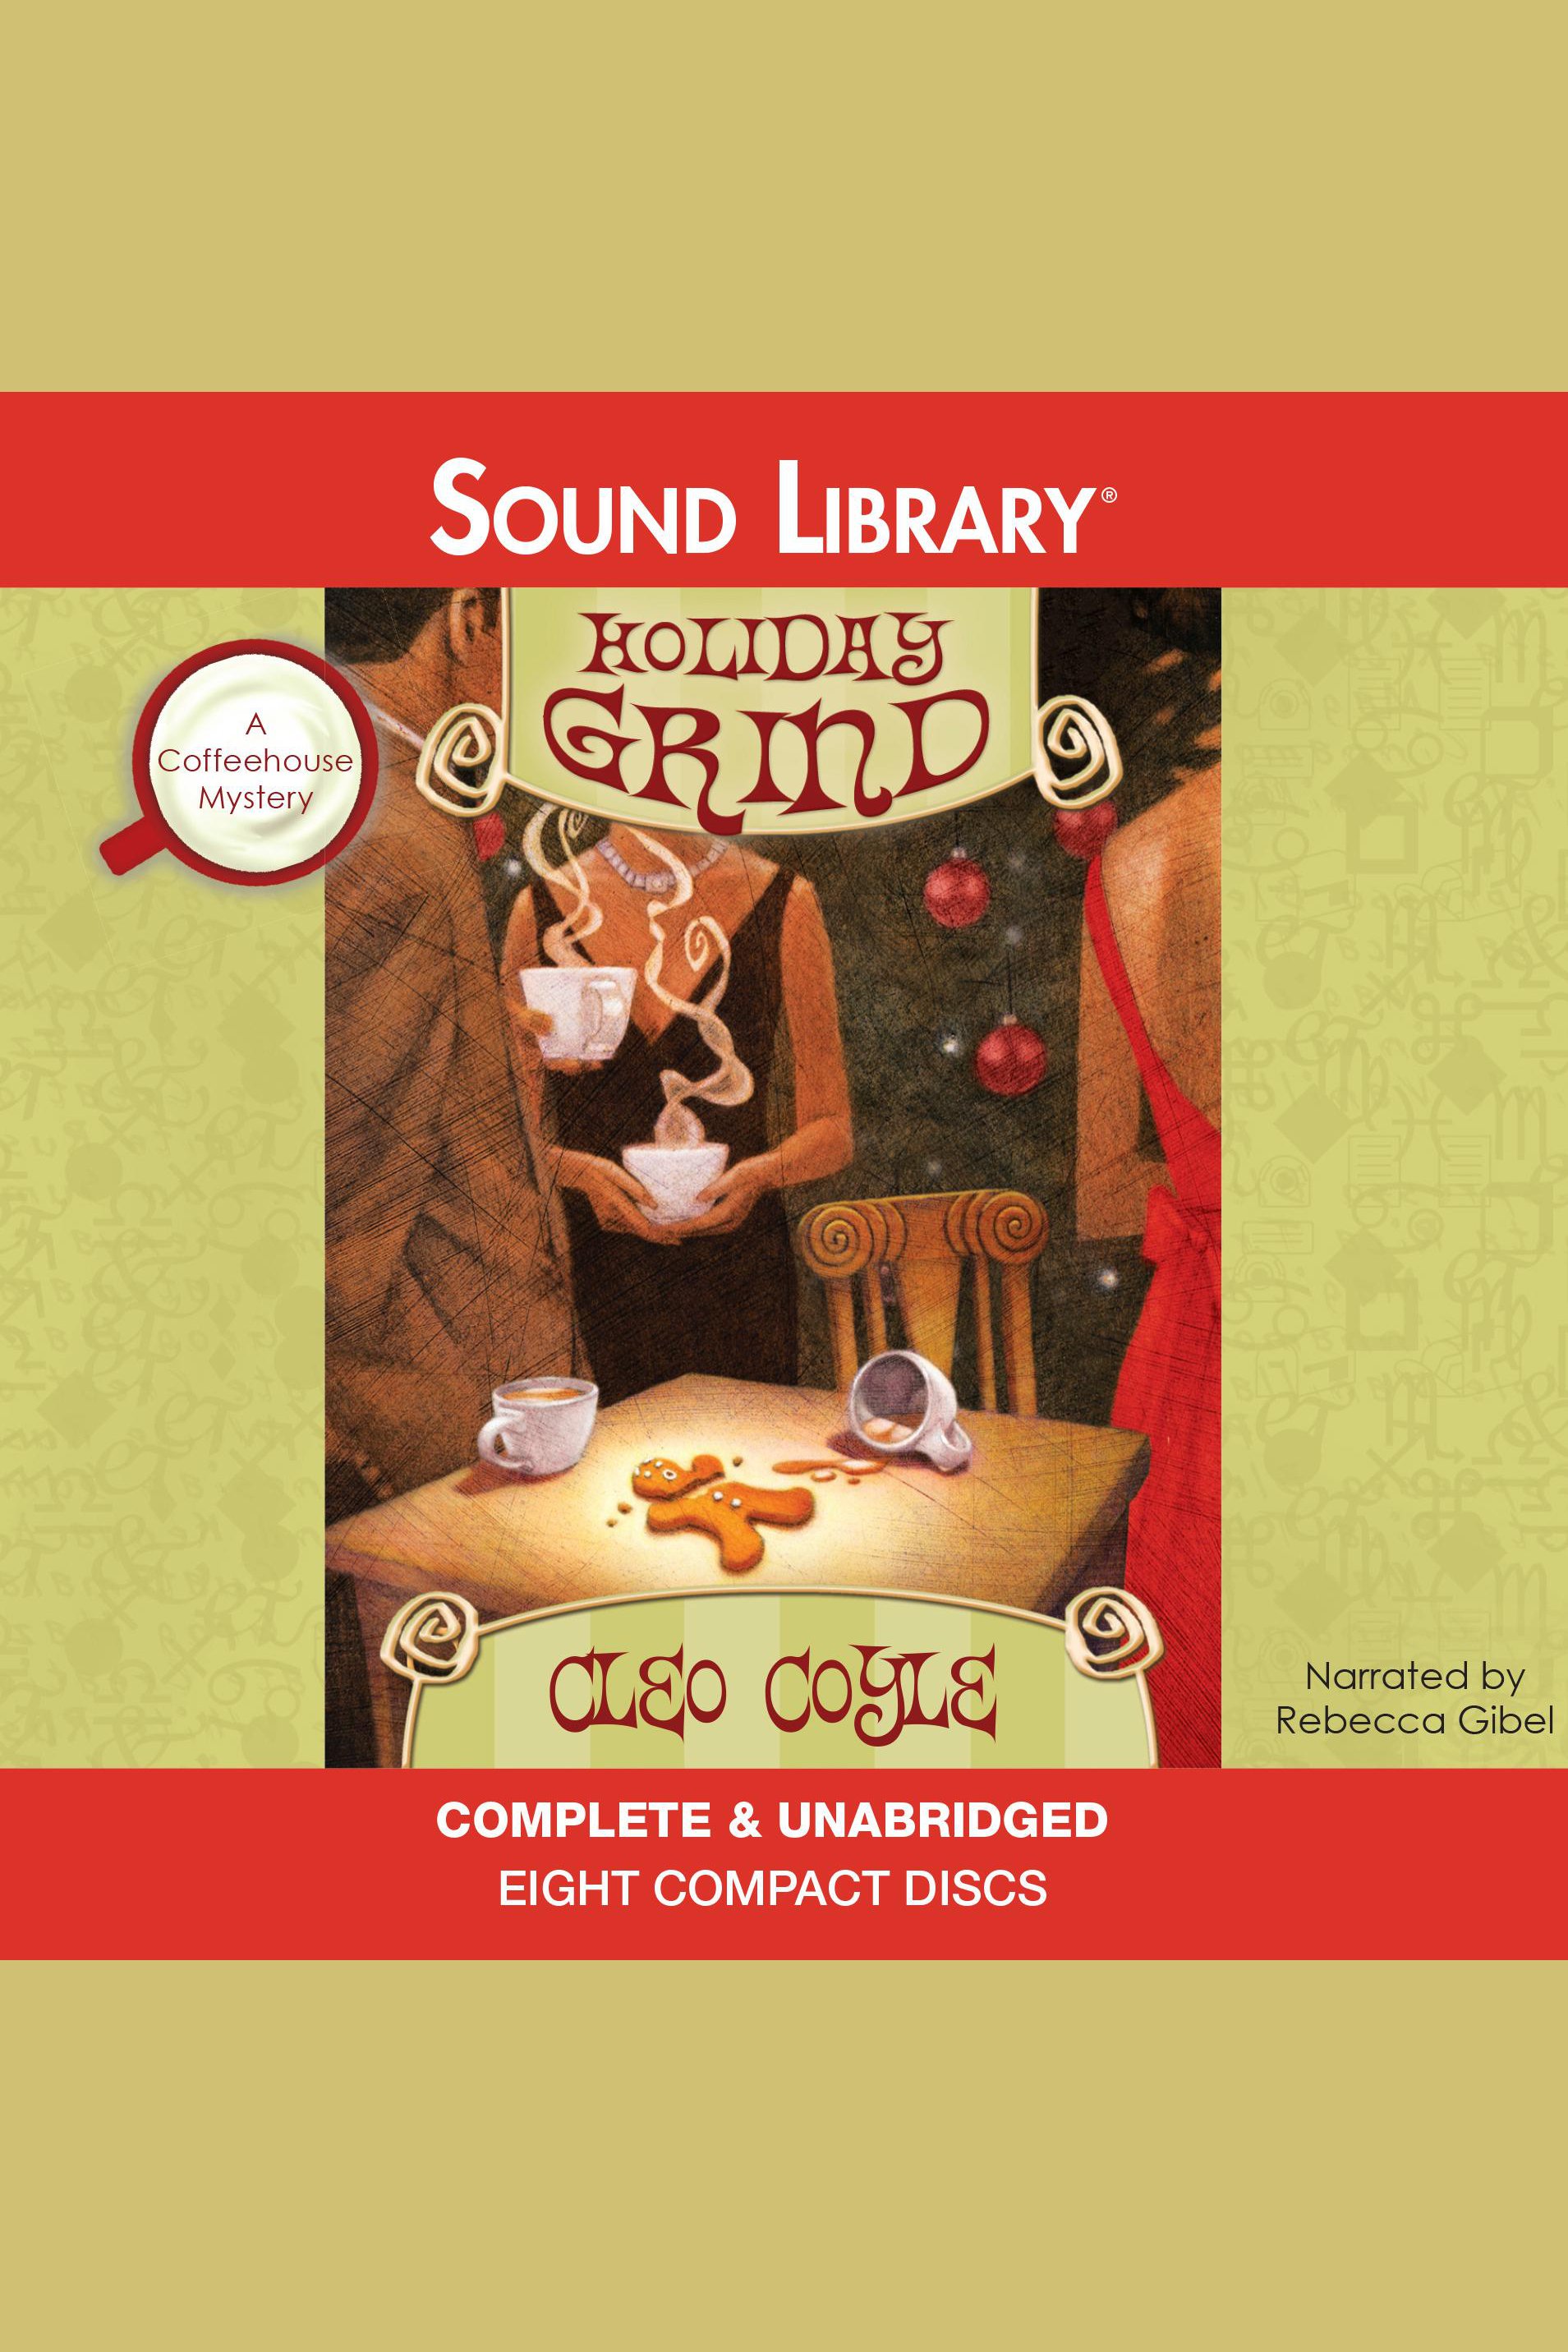 Umschlagbild für Holiday Grind [electronic resource] : A Coffeehouse Mystery, Book 8